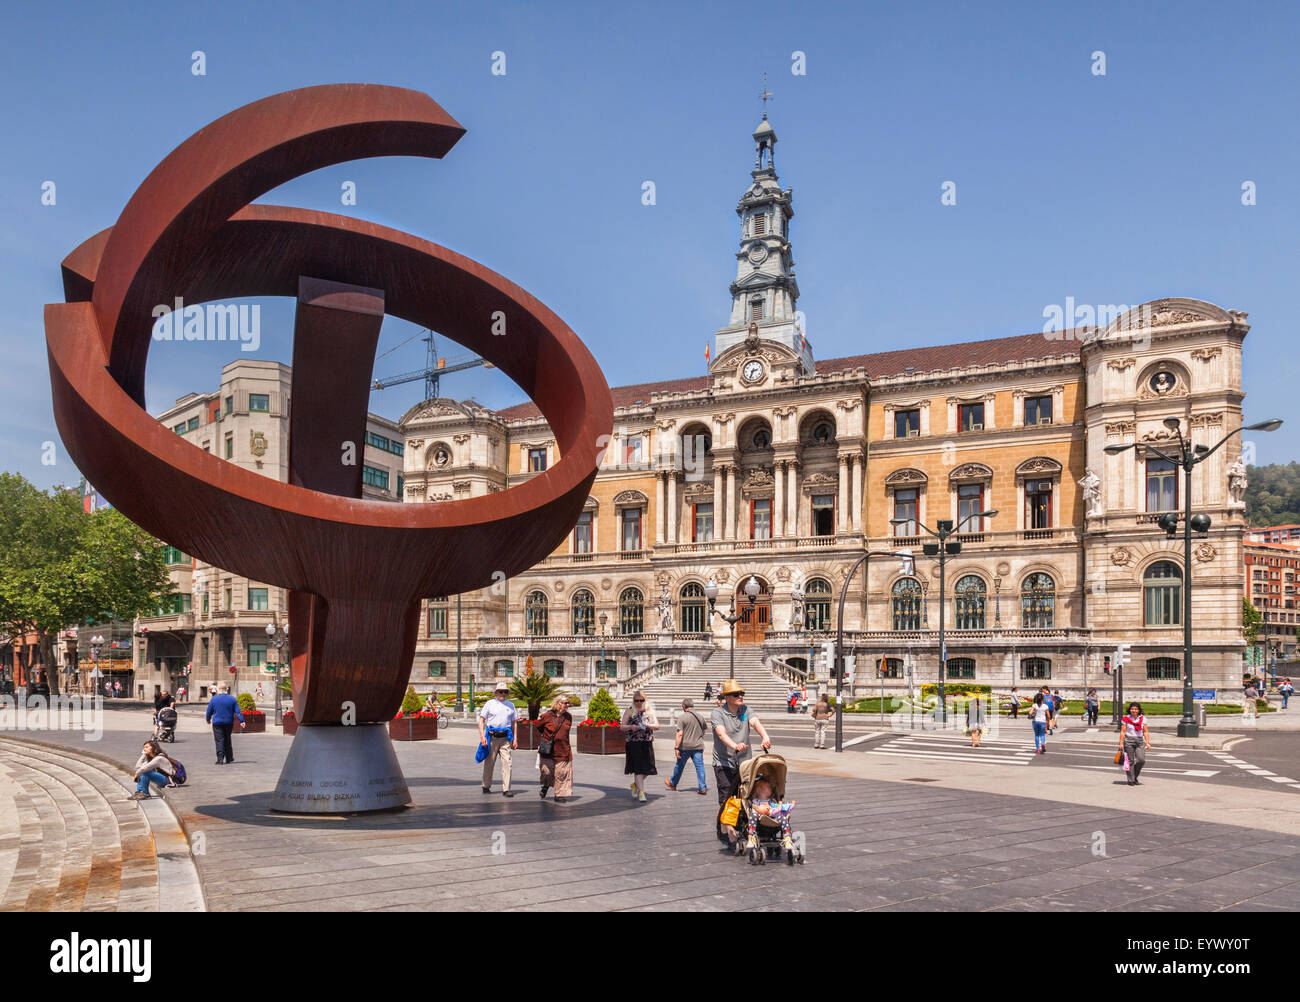 Sculpture by Jorge Oteiza, The Alternative Ovoid, and Bilbao Town Hall, Bilbao, Spain Stock Photo